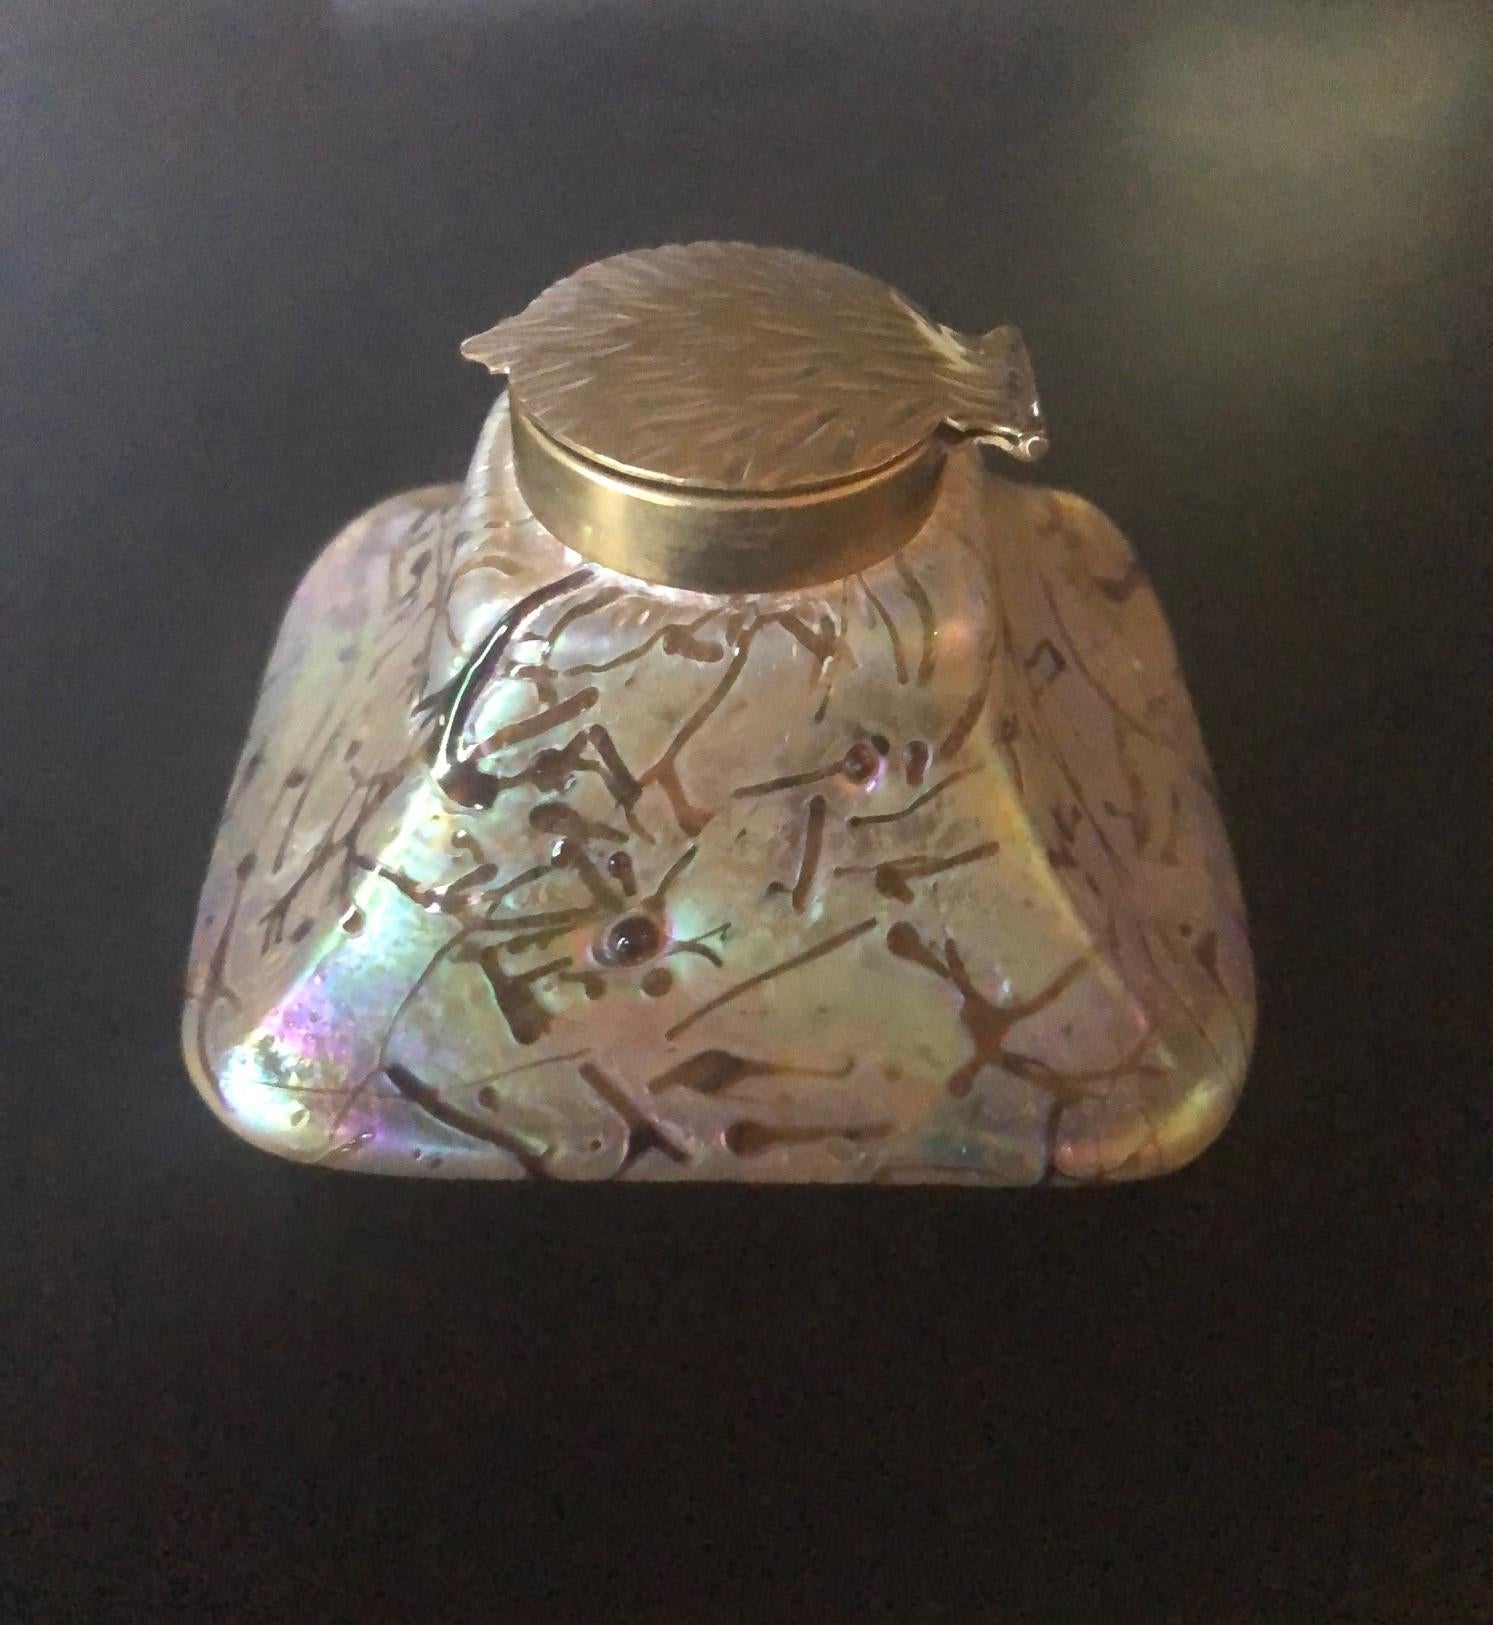 Stunning early Art Nouveau threaded iridescent art glass inkwell, circa 1900s. The piece features a gorgeous array of rainbow iridescence from pinks to blues to greens to browns. The inkwell is capped with a gorgeous brass leaf motif lid and rim.